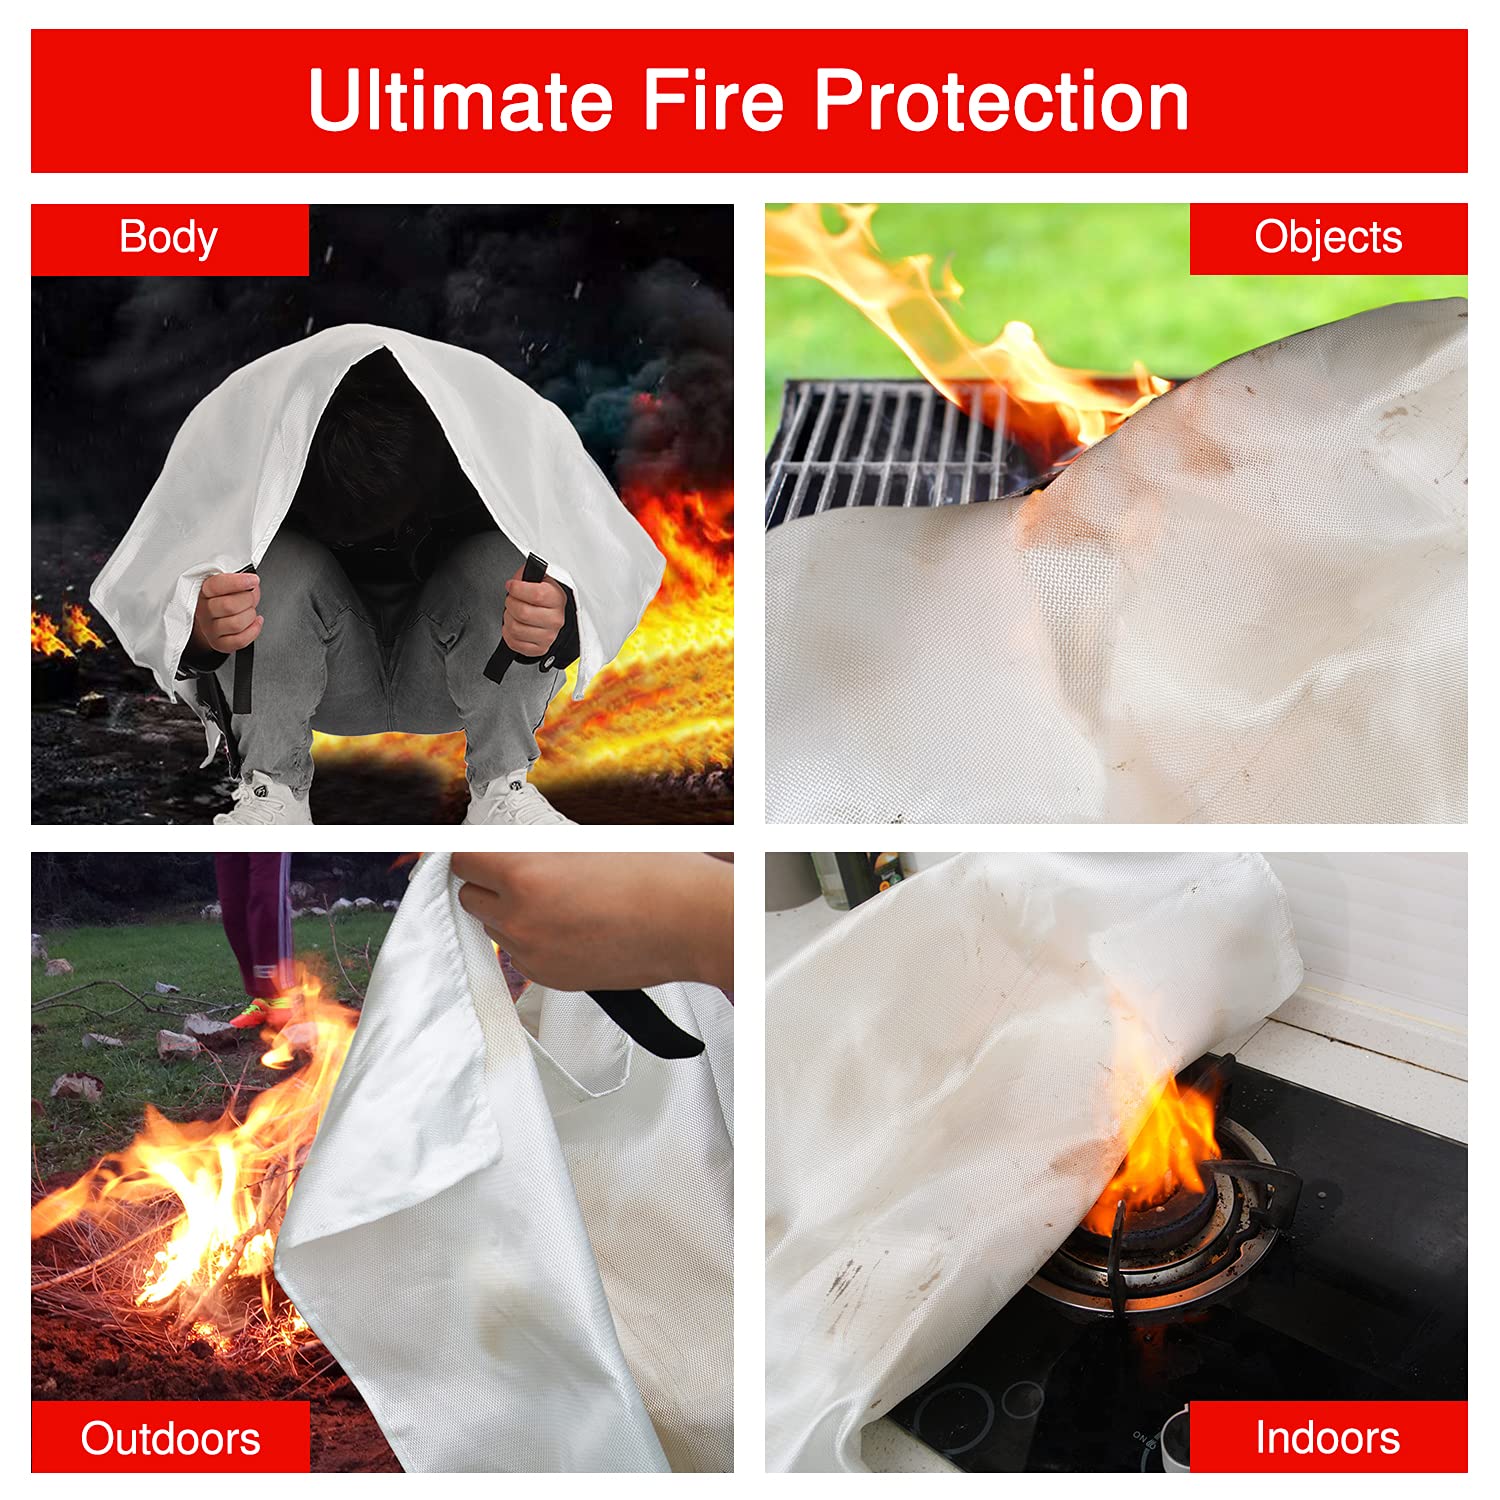 Mart Cobra Fire Blanket for Home Safety x4 Emergency Fire Blanket for Kitchen Fiberglass Fire Blankets Fireproof Blanket House Fire Safety Flame Retardant Fabric Home Safety Tarp Grease Spray